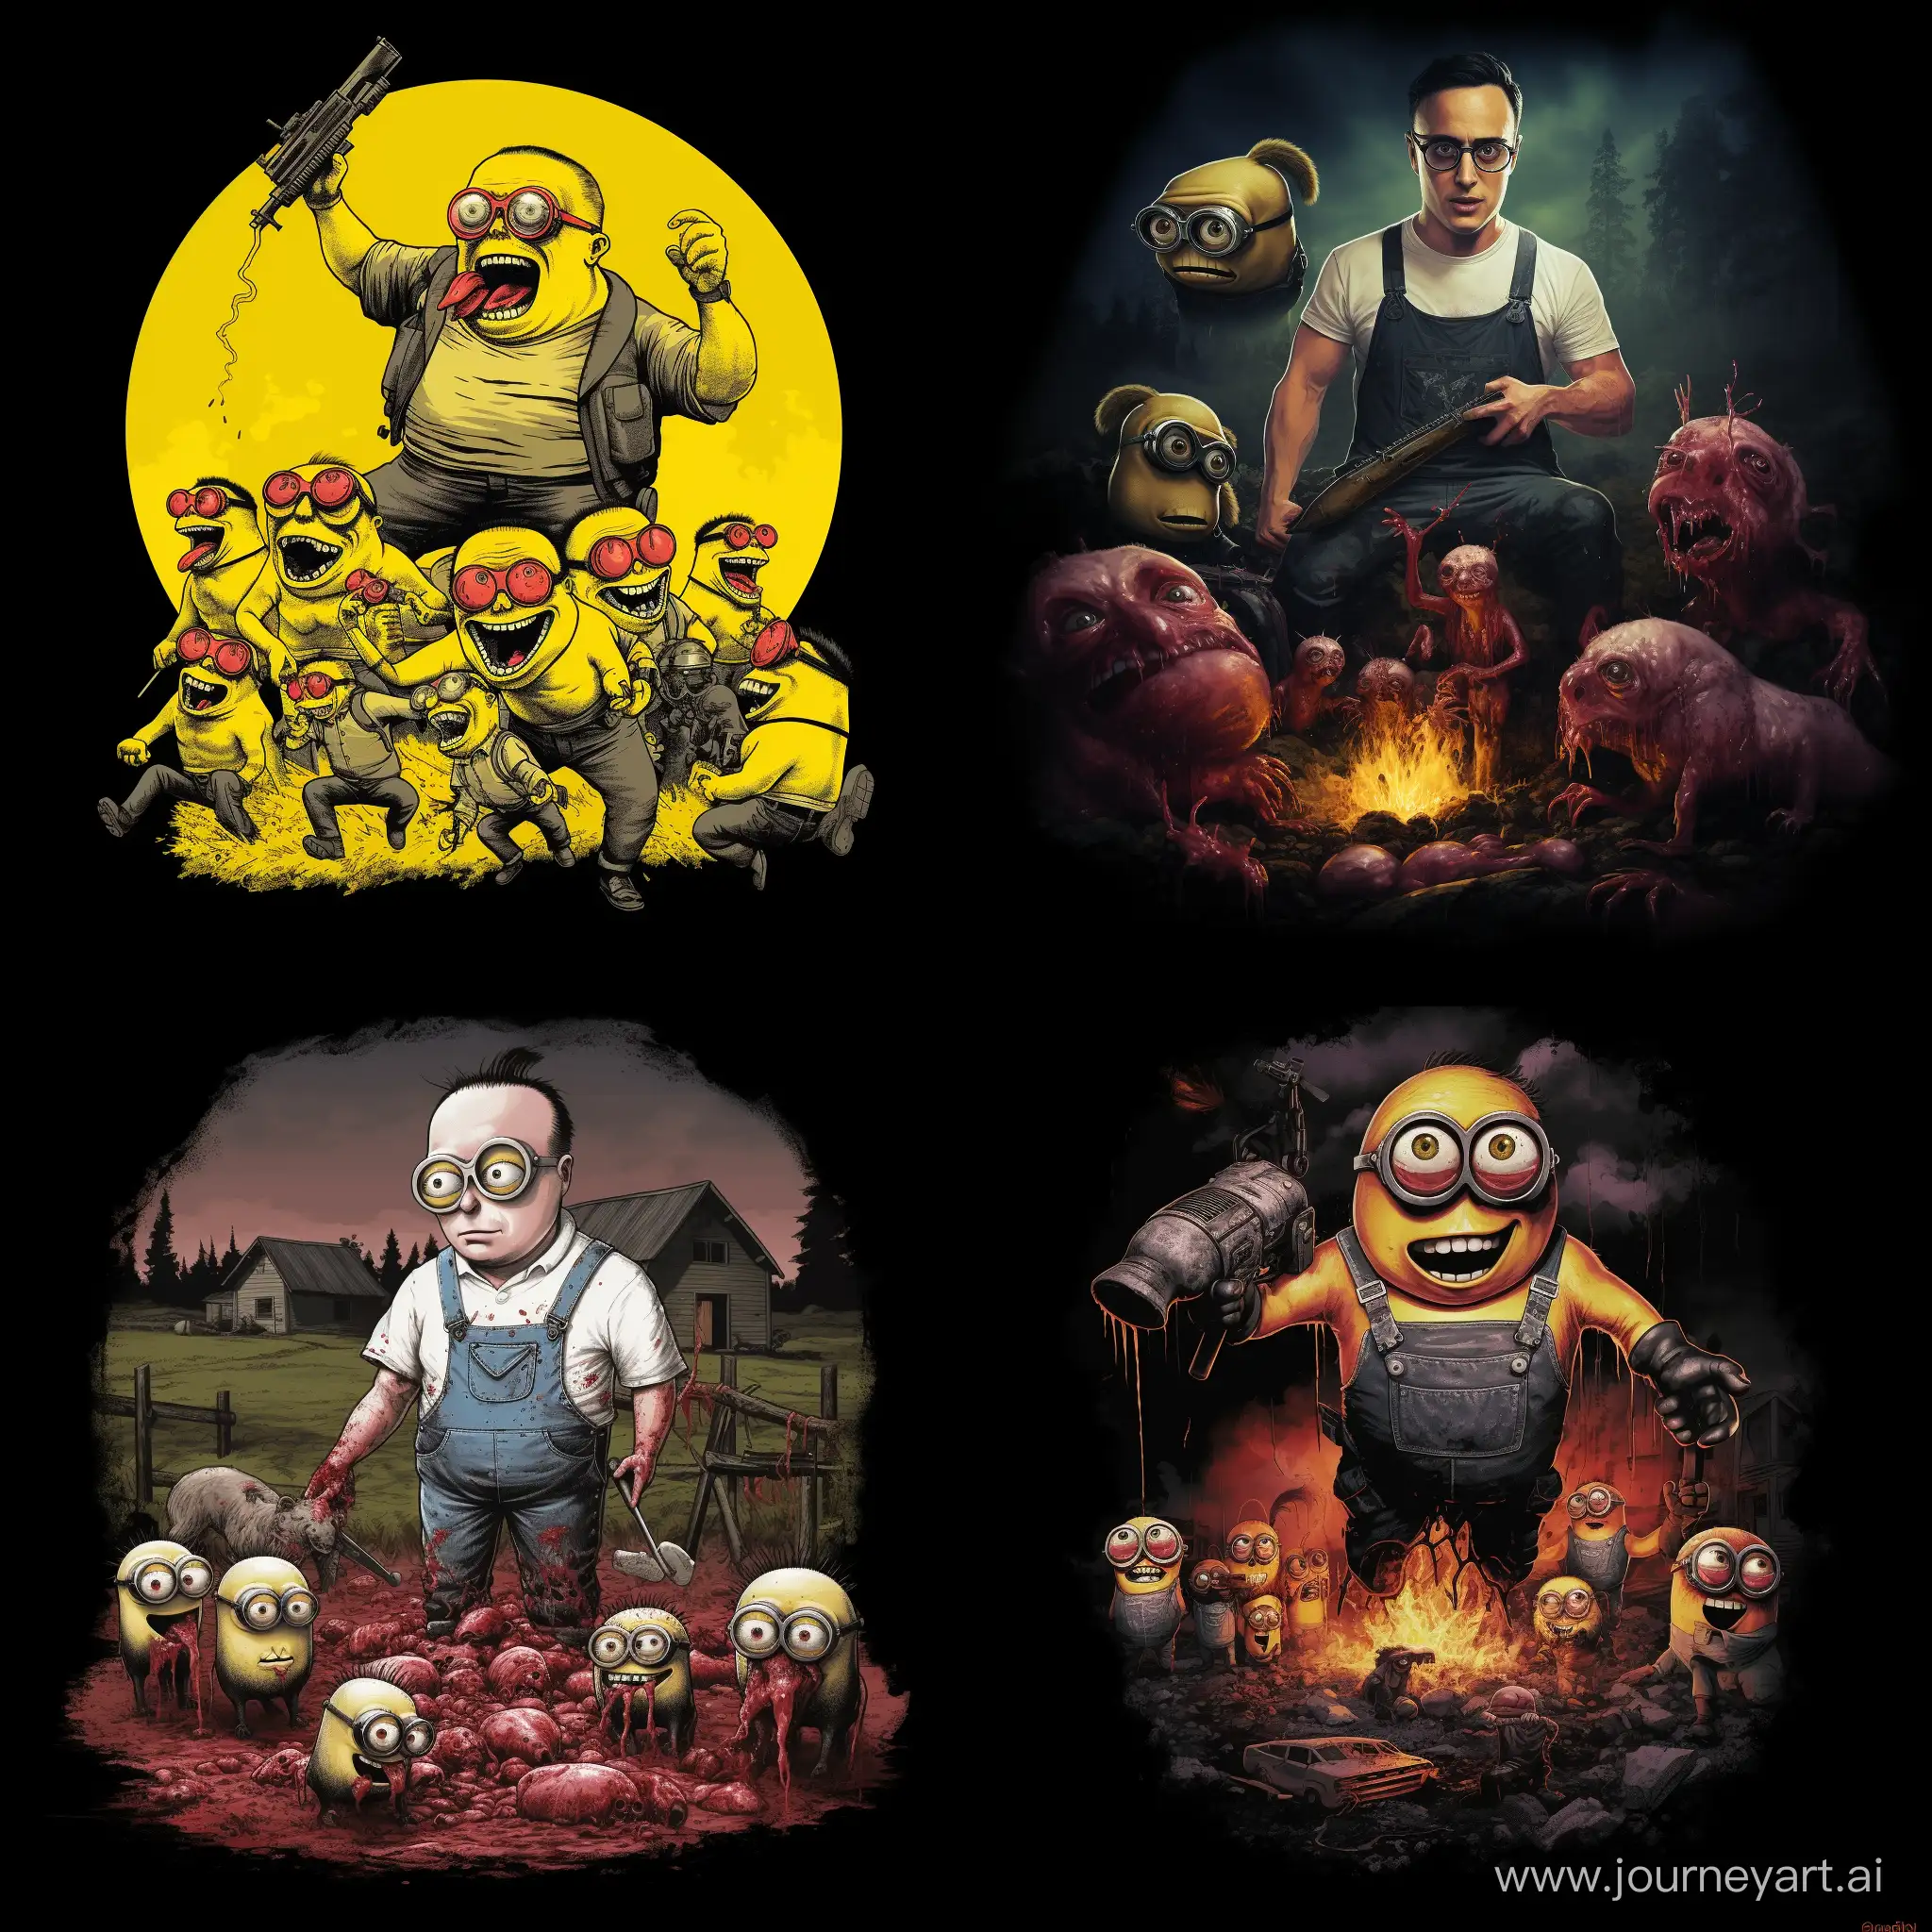 Energetic-Minion-in-SVO-Tshirt-Engages-in-Unique-Farm-Activity